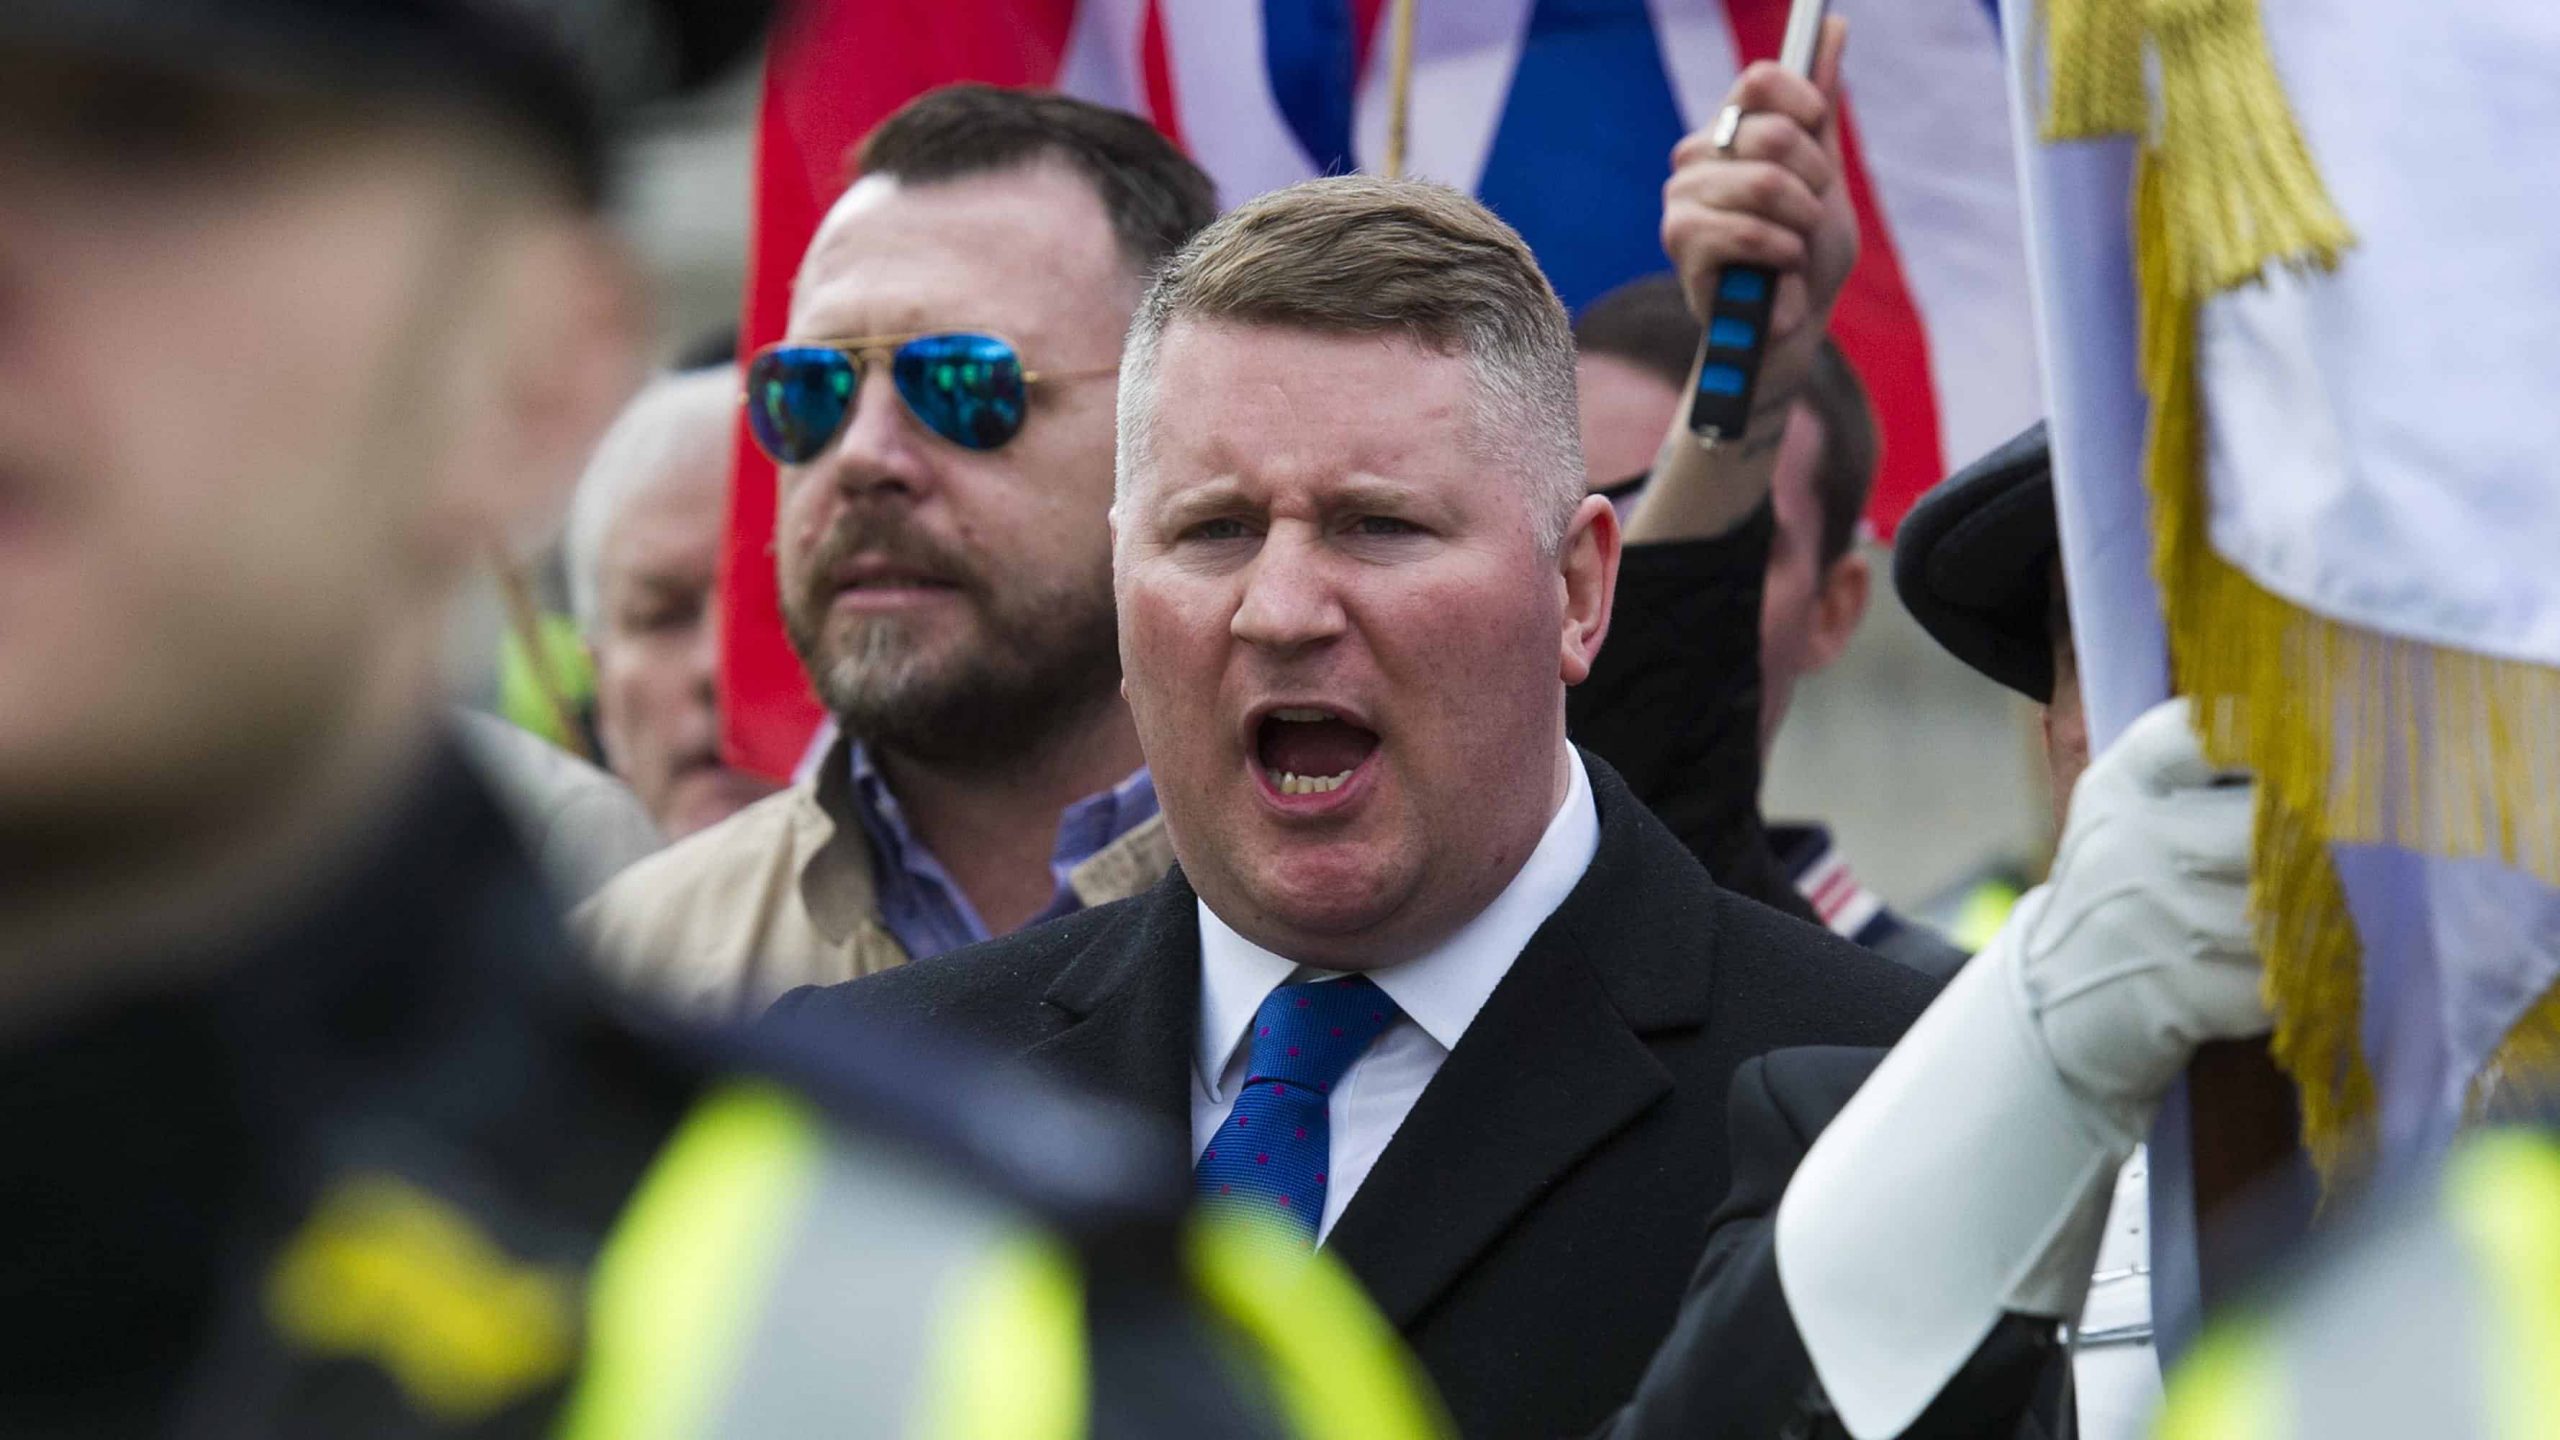 Britain First leader joins Conservative Party, saying “Boris Johnson is like us”